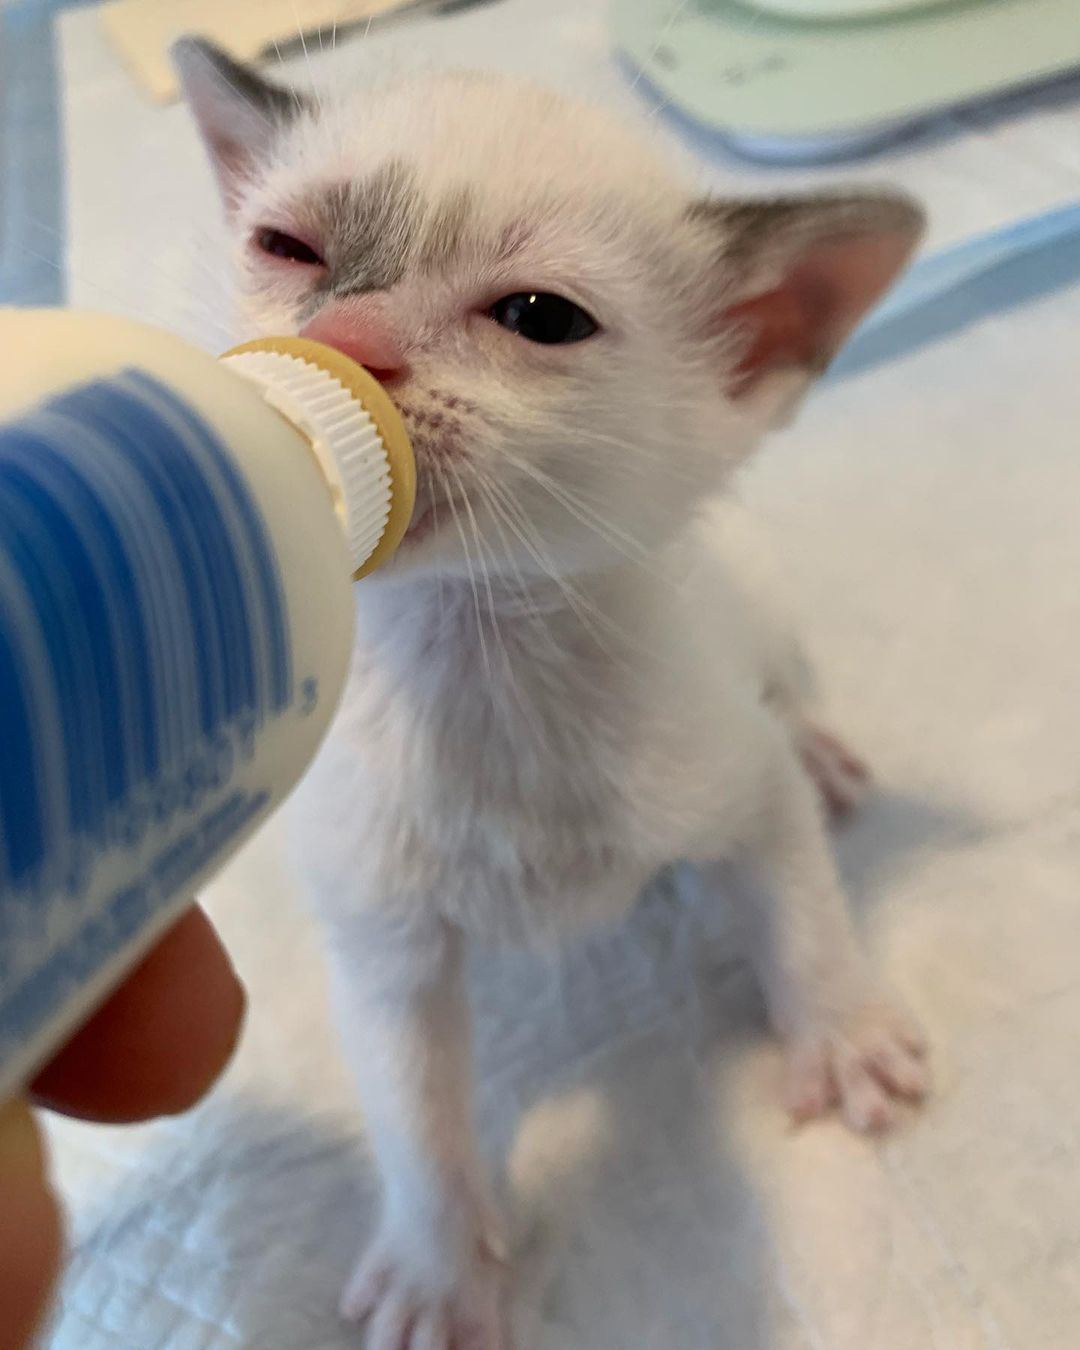 Monday’s after a long weekend! 😽 🍼🦊🐺🐻🐧 <a target='_blank' href='https://www.instagram.com/explore/tags/bottlebabies/'>#bottlebabies</a> <a target='_blank' href='https://www.instagram.com/explore/tags/bottlebaby/'>#bottlebaby</a> <a target='_blank' href='https://www.instagram.com/explore/tags/bottlebabykitten/'>#bottlebabykitten</a> <a target='_blank' href='https://www.instagram.com/explore/tags/siamesemix/'>#siamesemix</a> <a target='_blank' href='https://www.instagram.com/explore/tags/tuxedokitten/'>#tuxedokitten</a> <a target='_blank' href='https://www.instagram.com/explore/tags/orphankitten/'>#orphankitten</a>